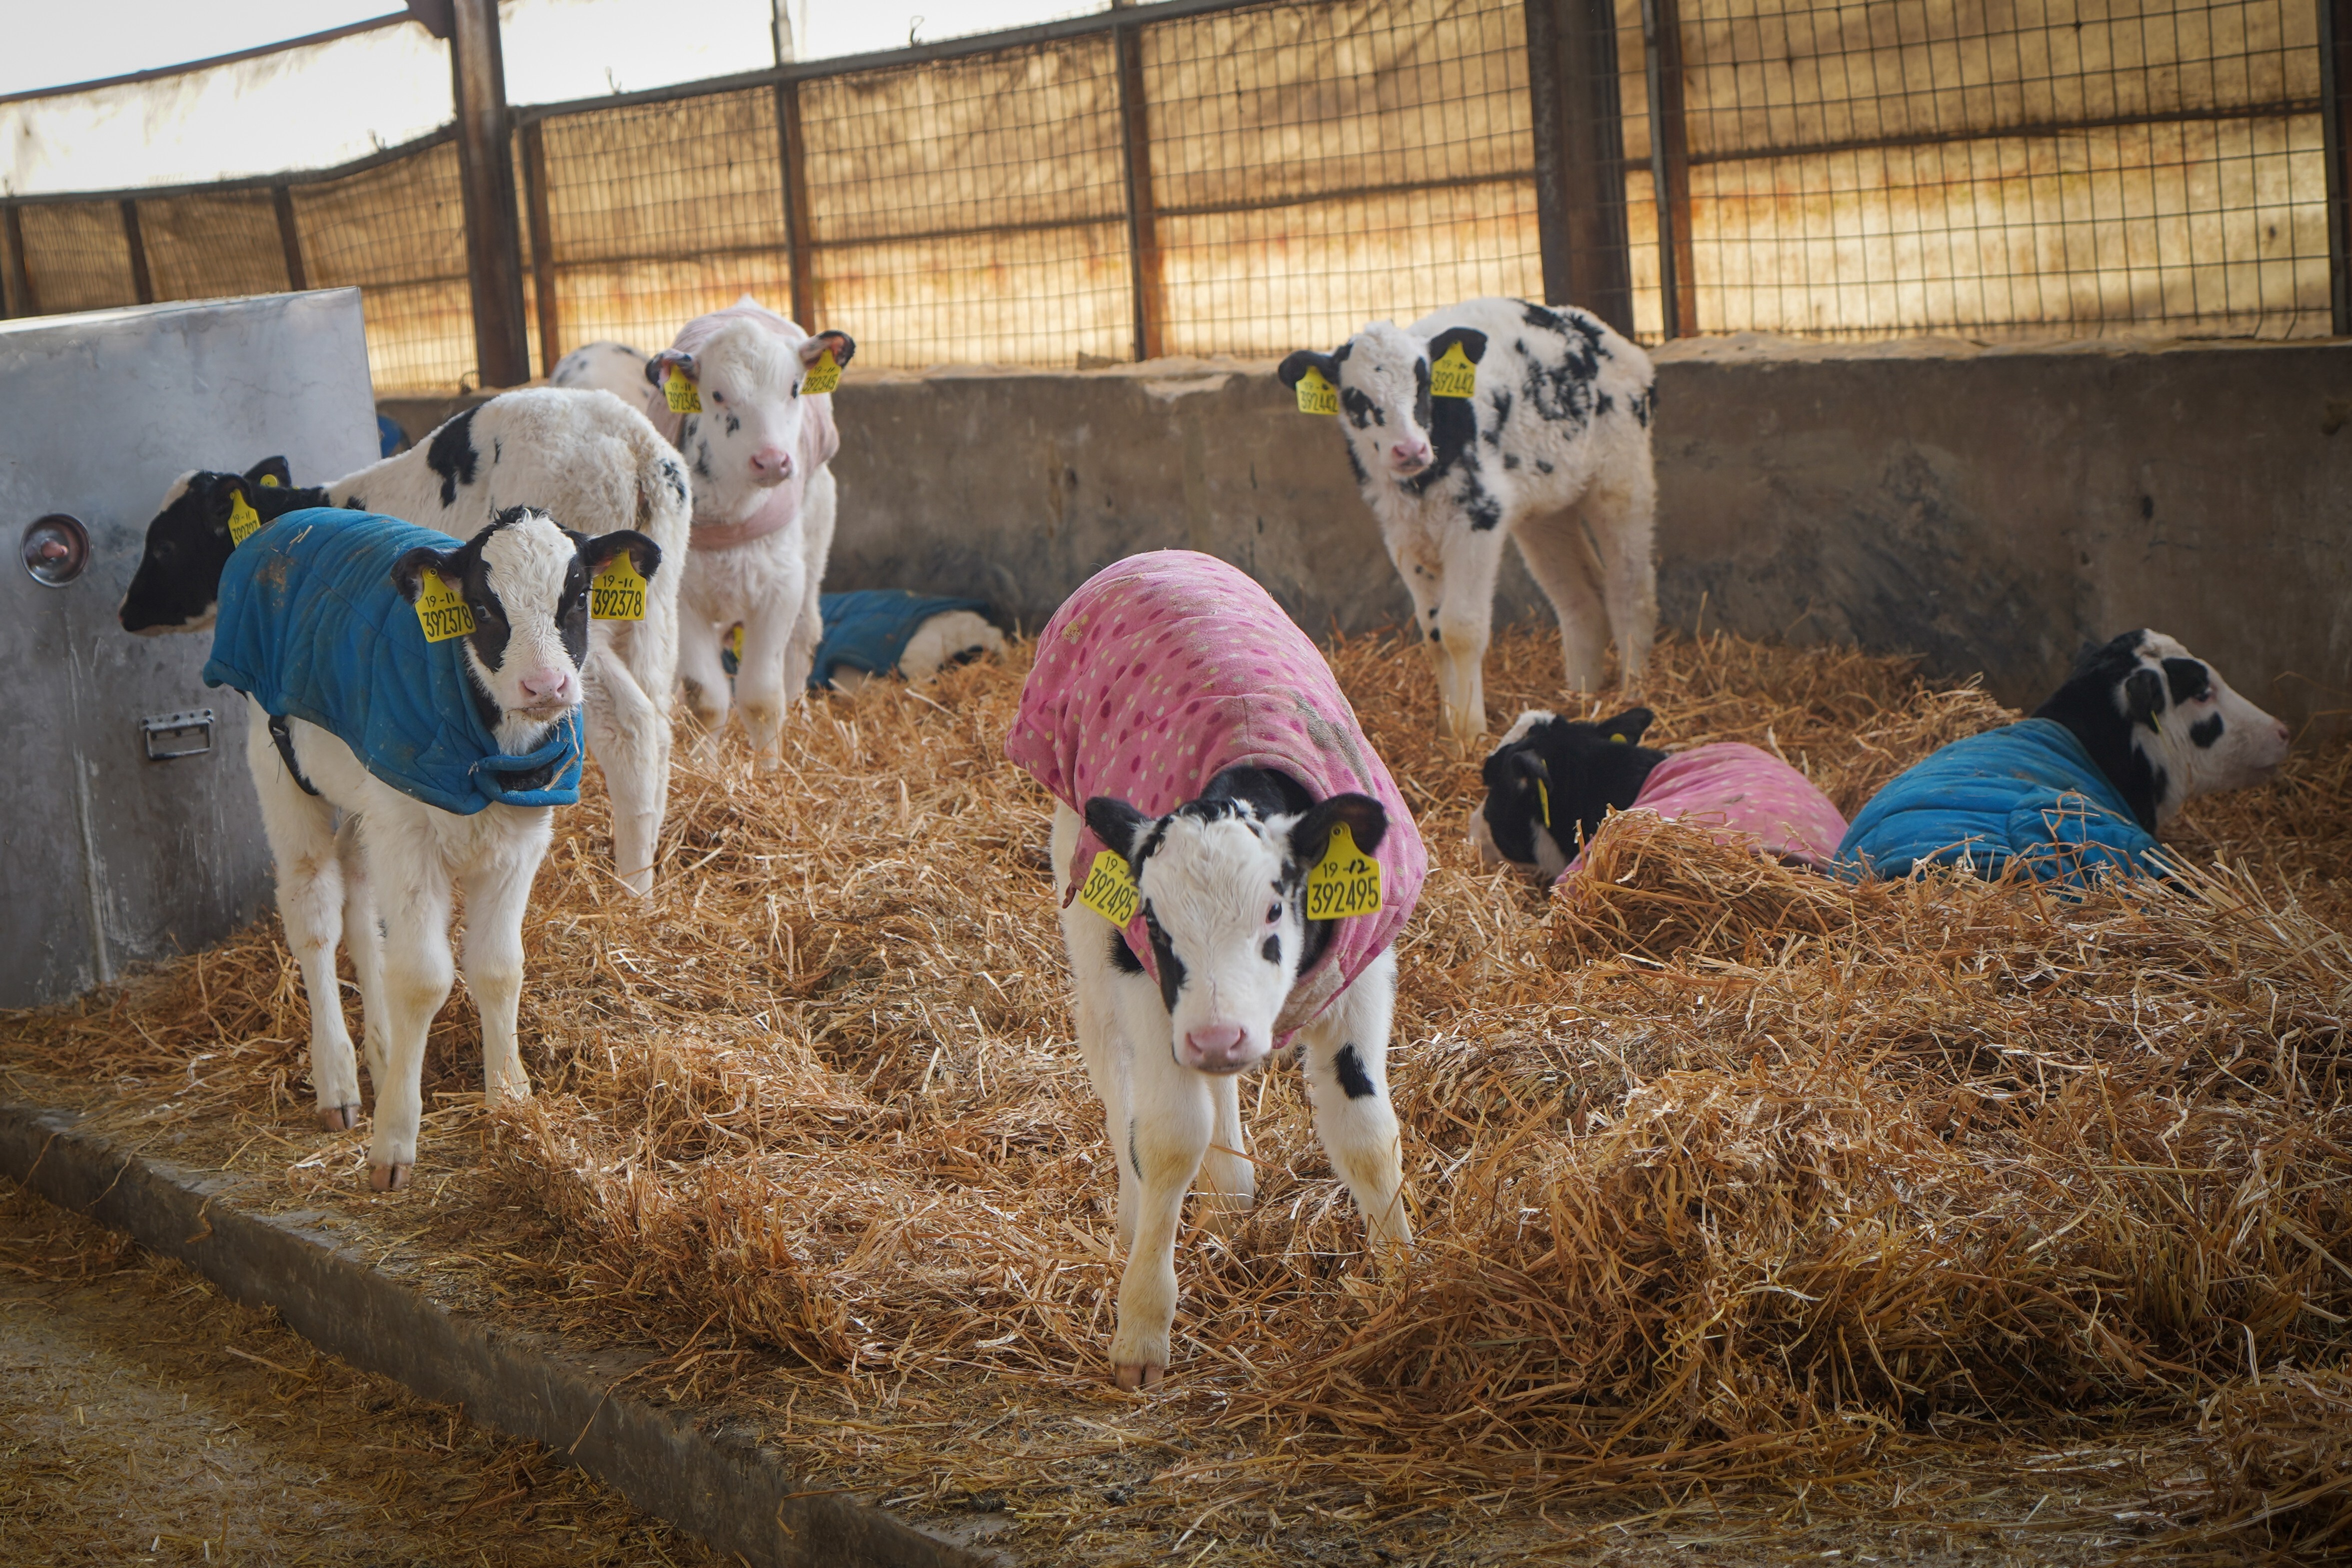 Calves, with identification tags, wear vests to keep warm in one of Feihe’s facilities in Heilongjiang, China. Photo: Tom Wang